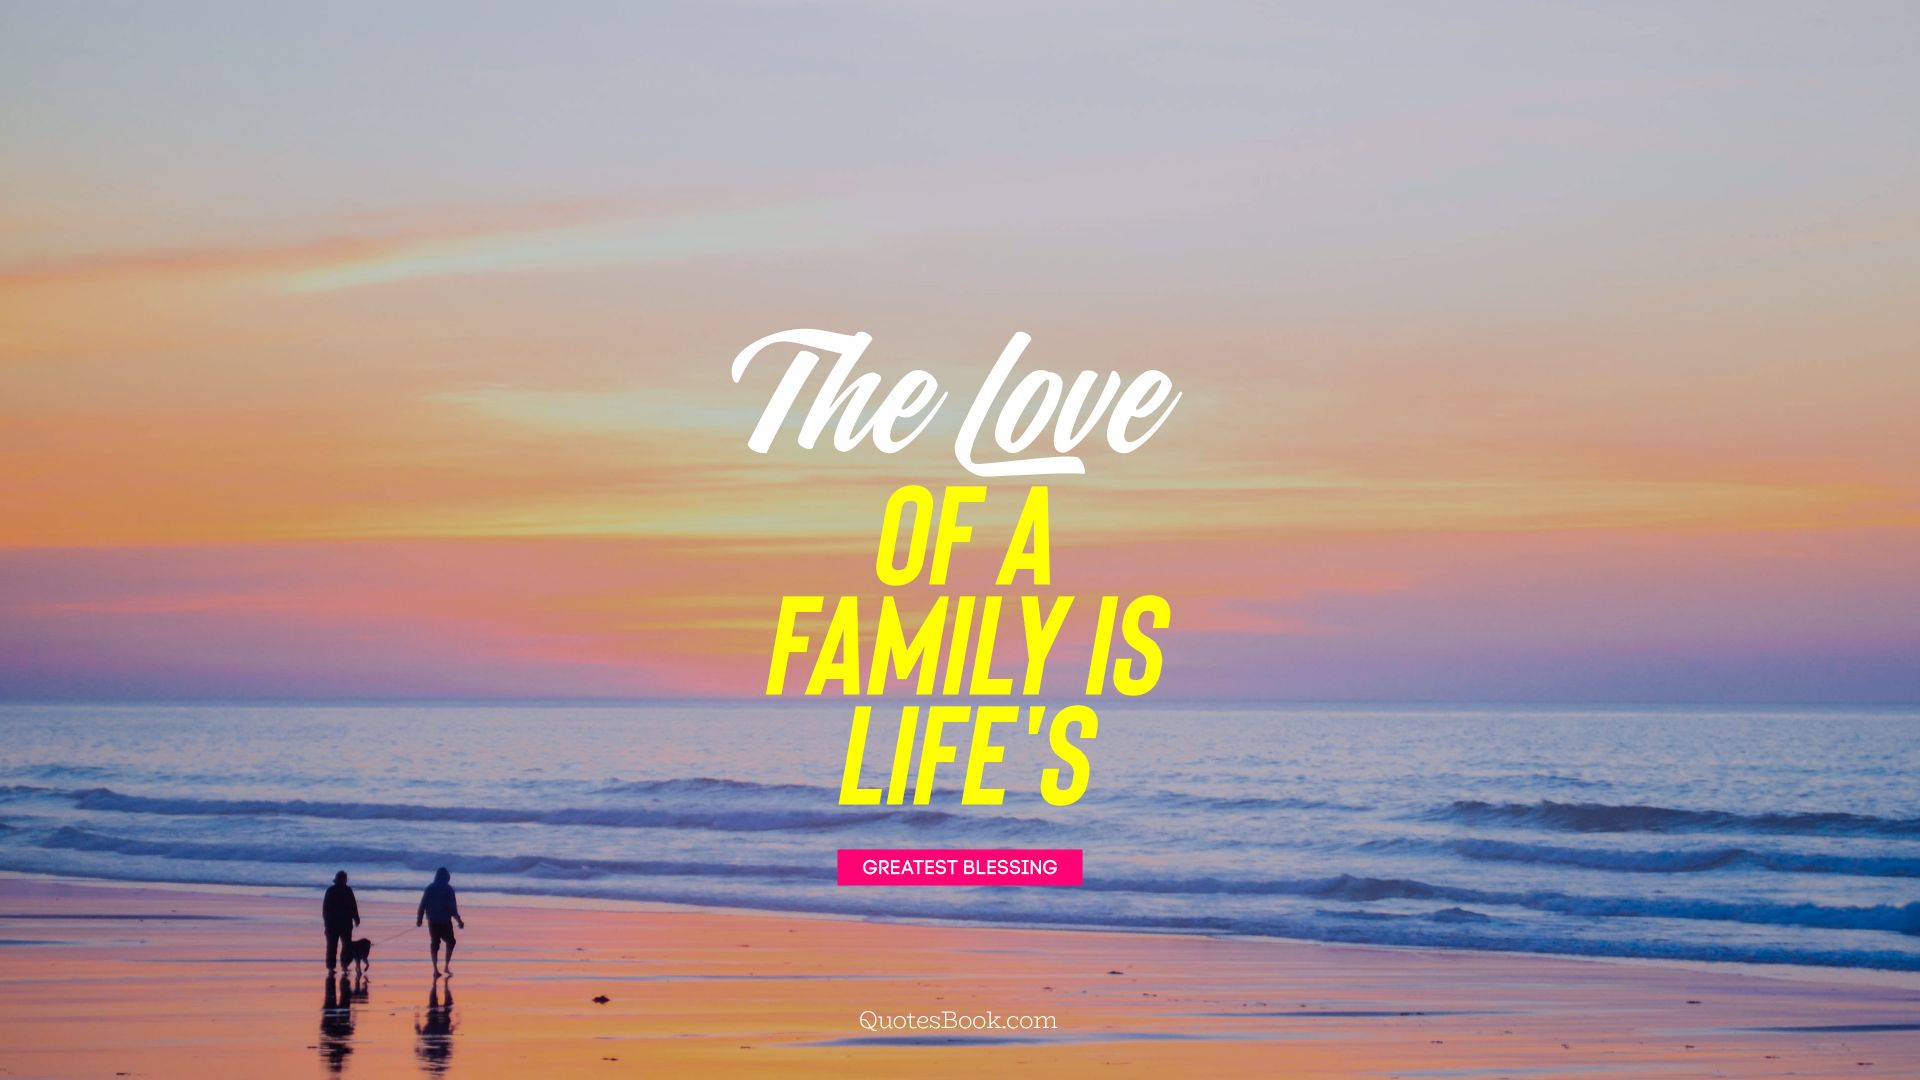 The love of a family is life's